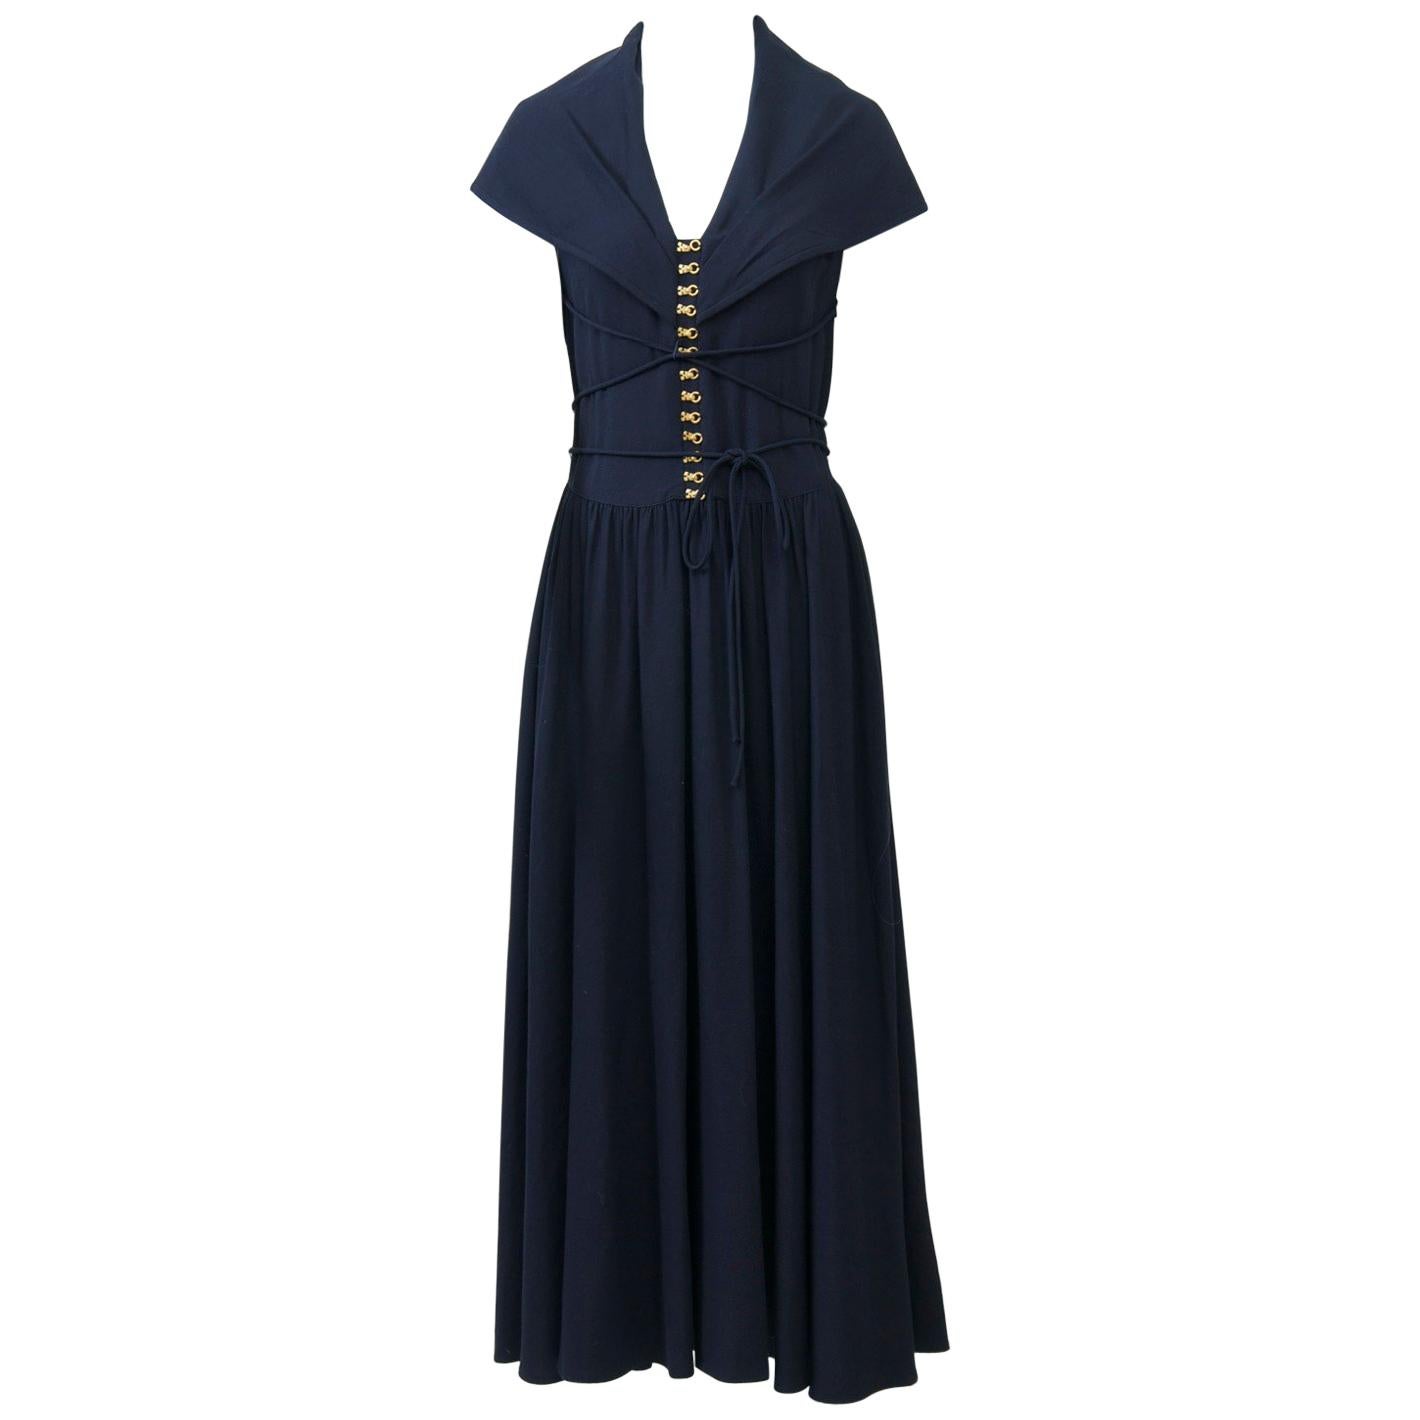 Kathryn Dianos Navy Maxi Dress For Sale